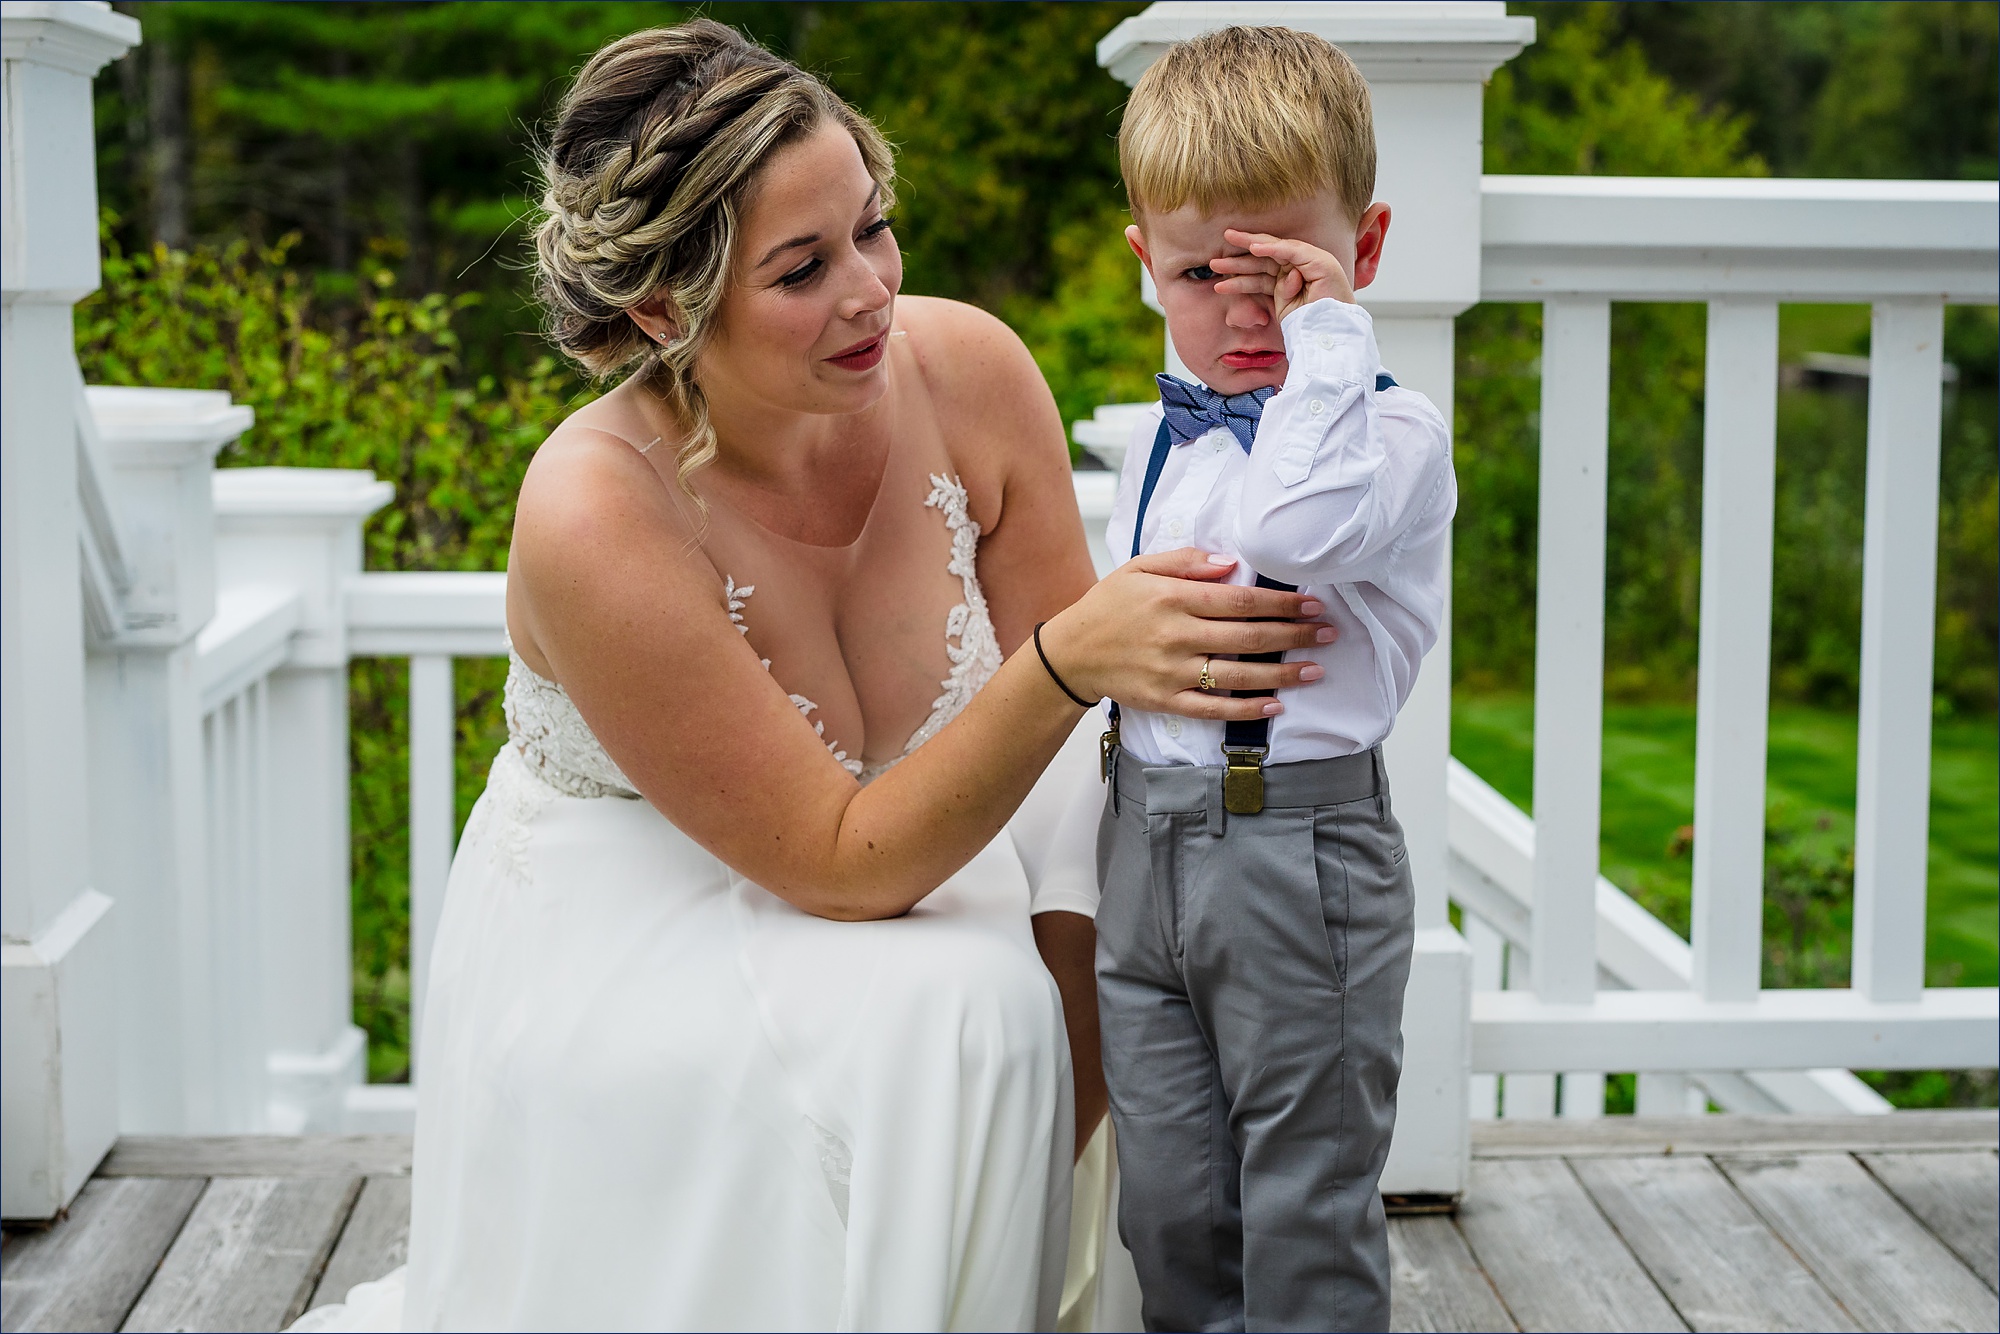 The bride and her son share a moment together before heading off the Maine ceremony